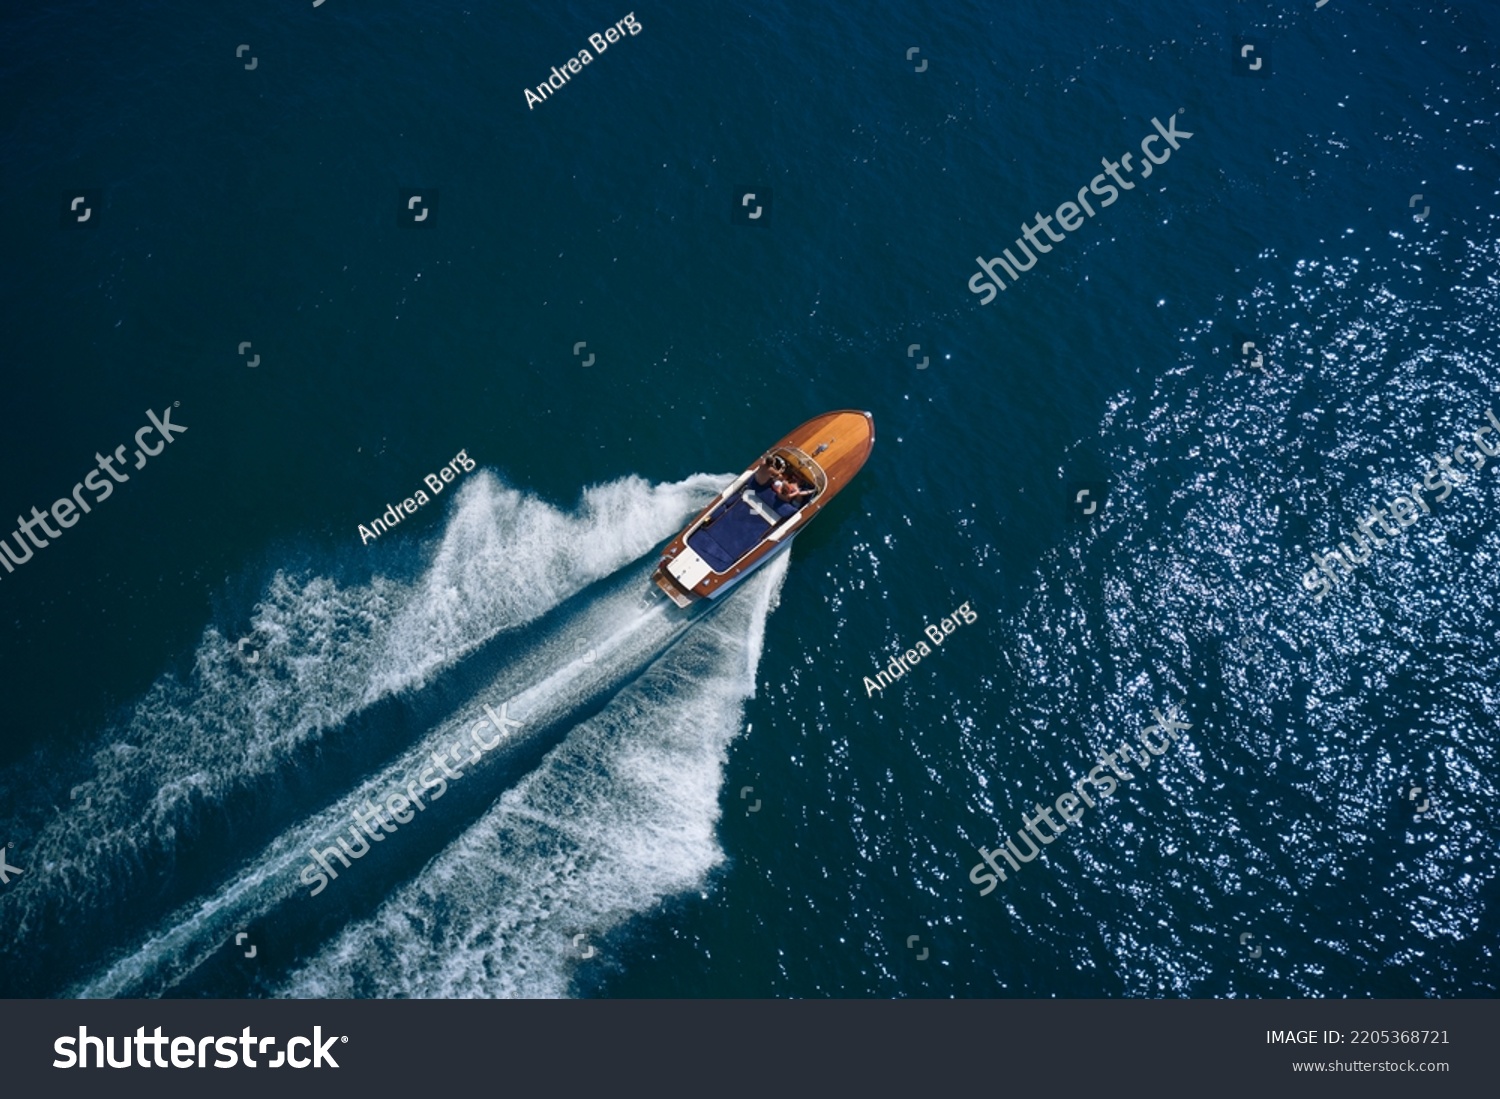 Luxurious wooden motor boat rushes through the waves of the blue Sea. Classic Italian wooden boat fast moving aerial view. Luxurious wooden boat fast movement on dark water. #2205368721